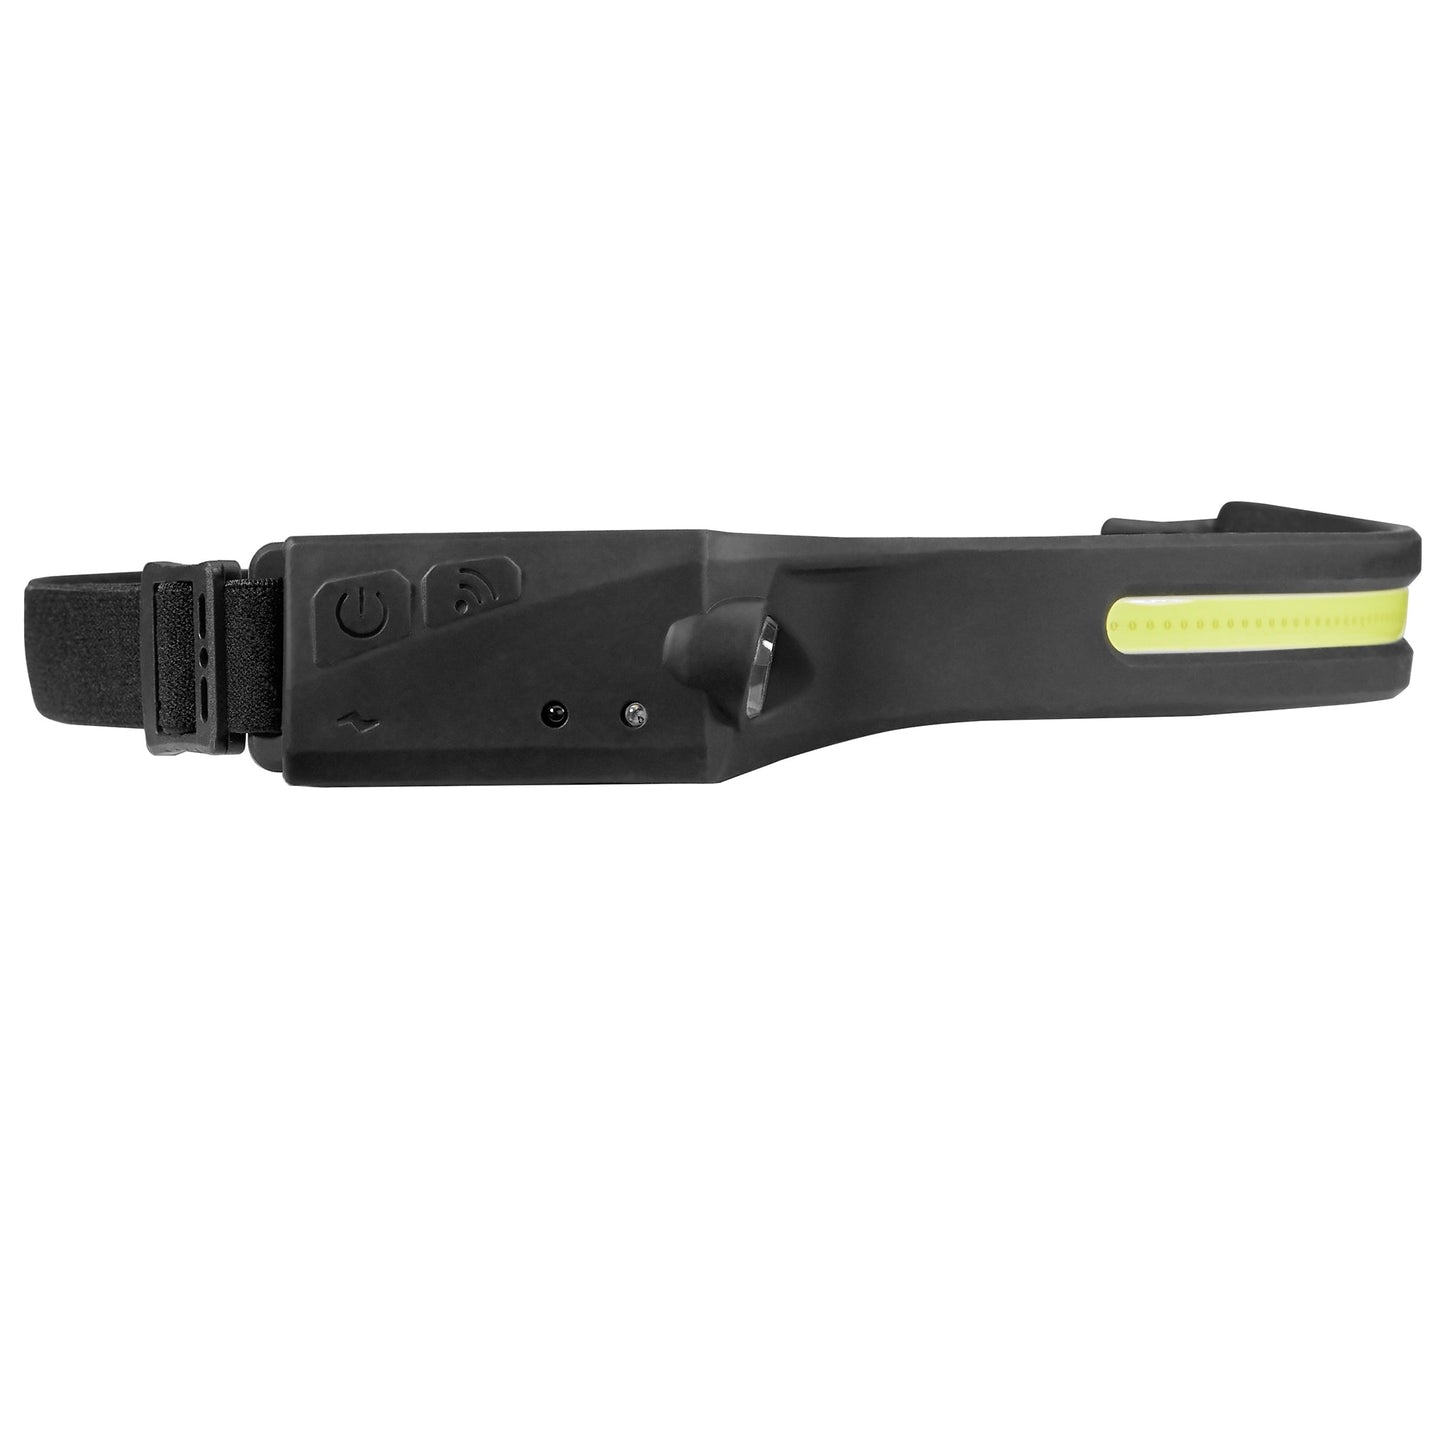 Headlamp with front light strip and lateral spot light incl. motion sensor for operation